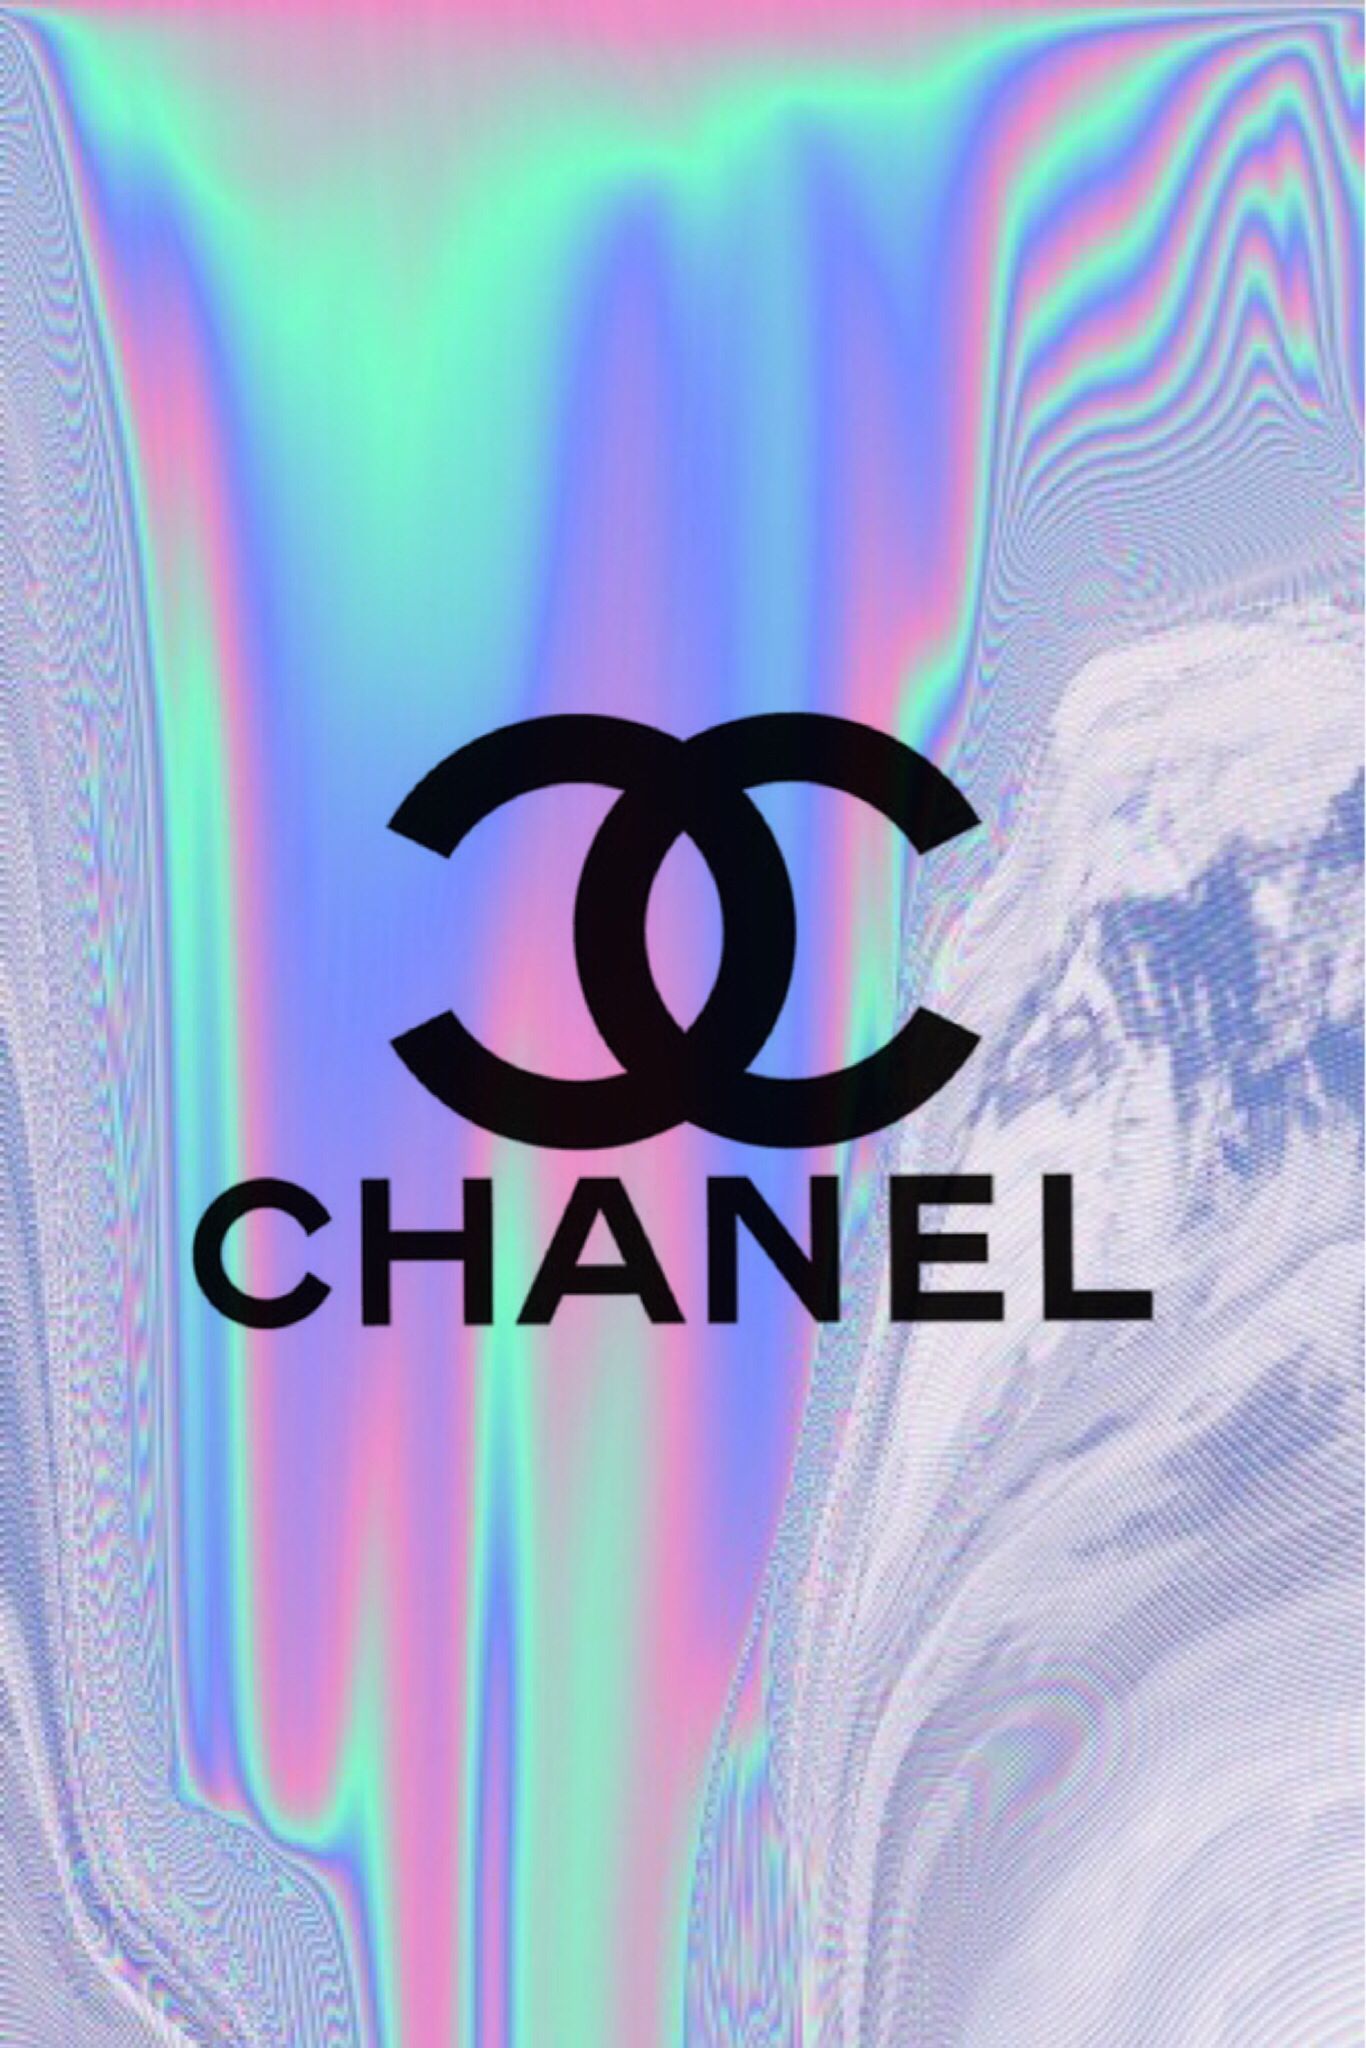 Chanel Aesthetic Wallpaper Free Chanel Aesthetic Background